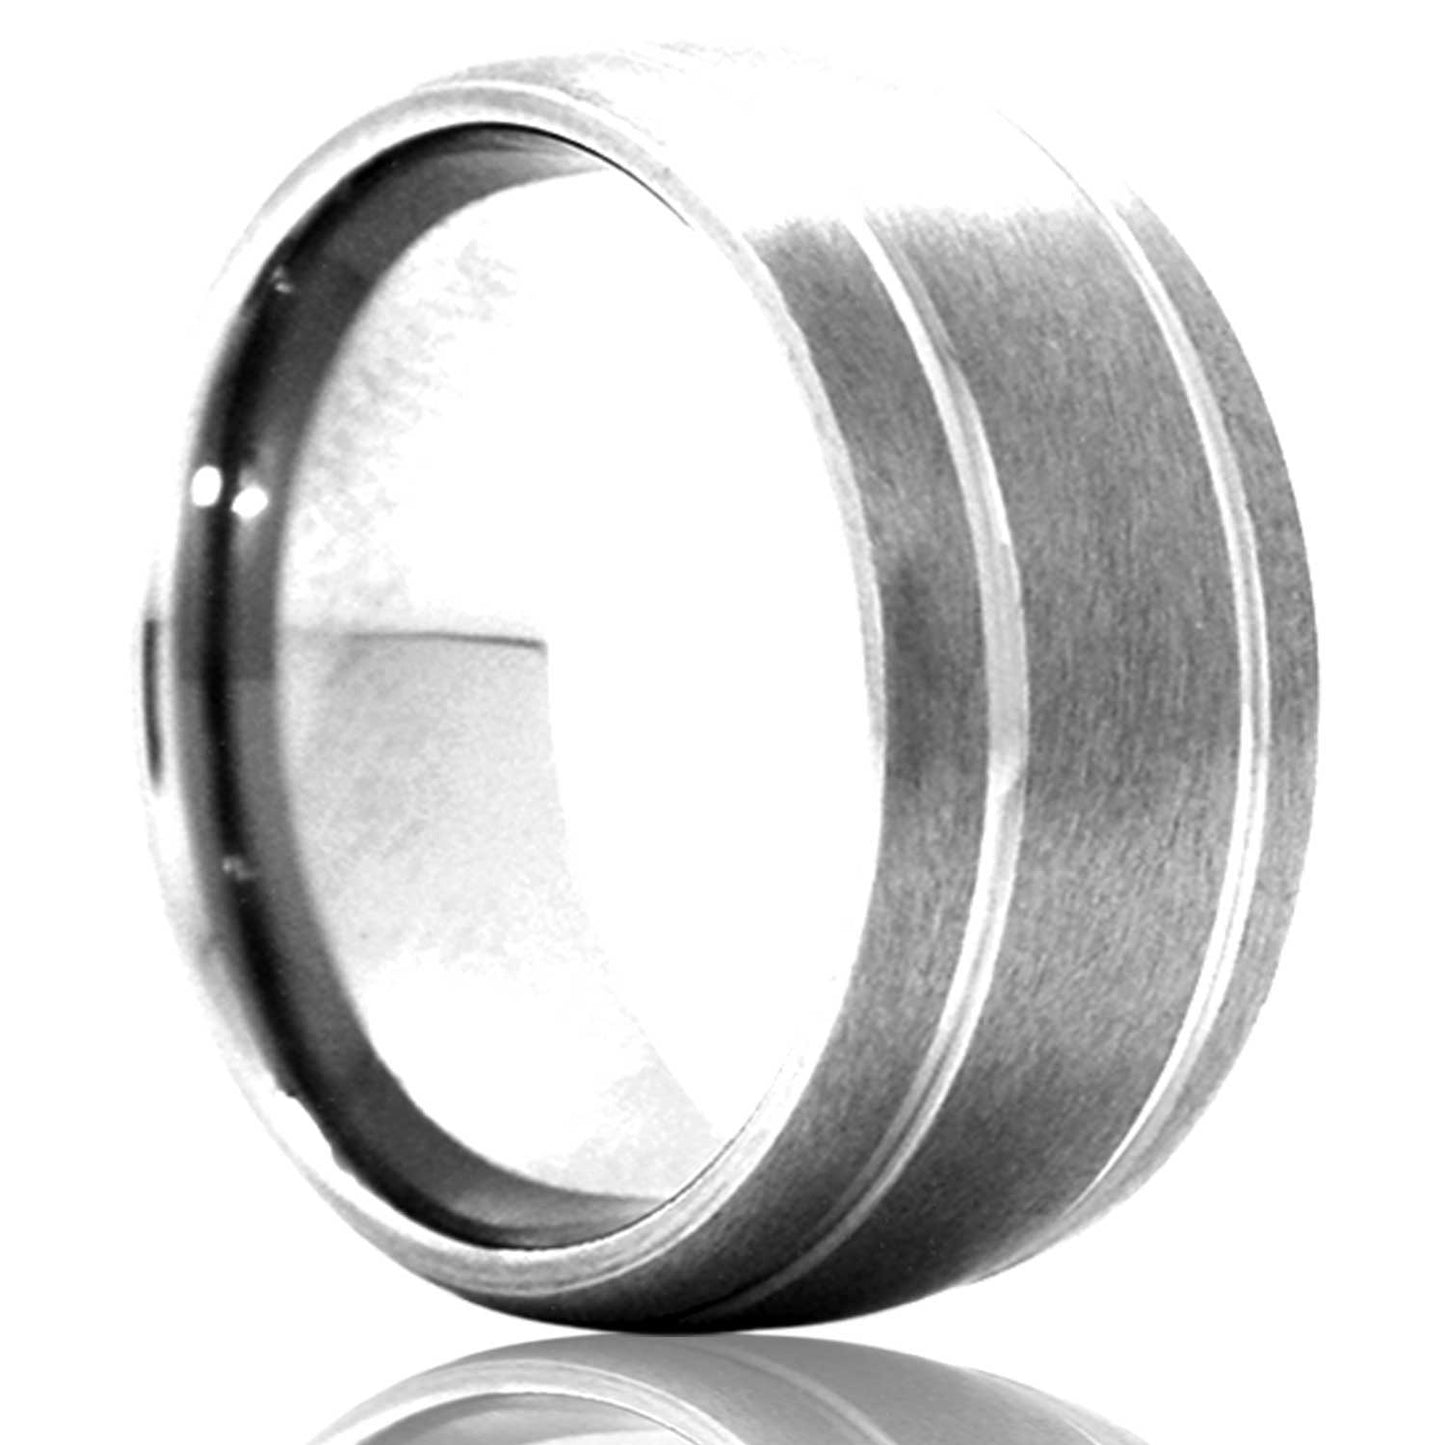 A domed satin finish cobalt wedding band with grooved edges displayed on a neutral white background.